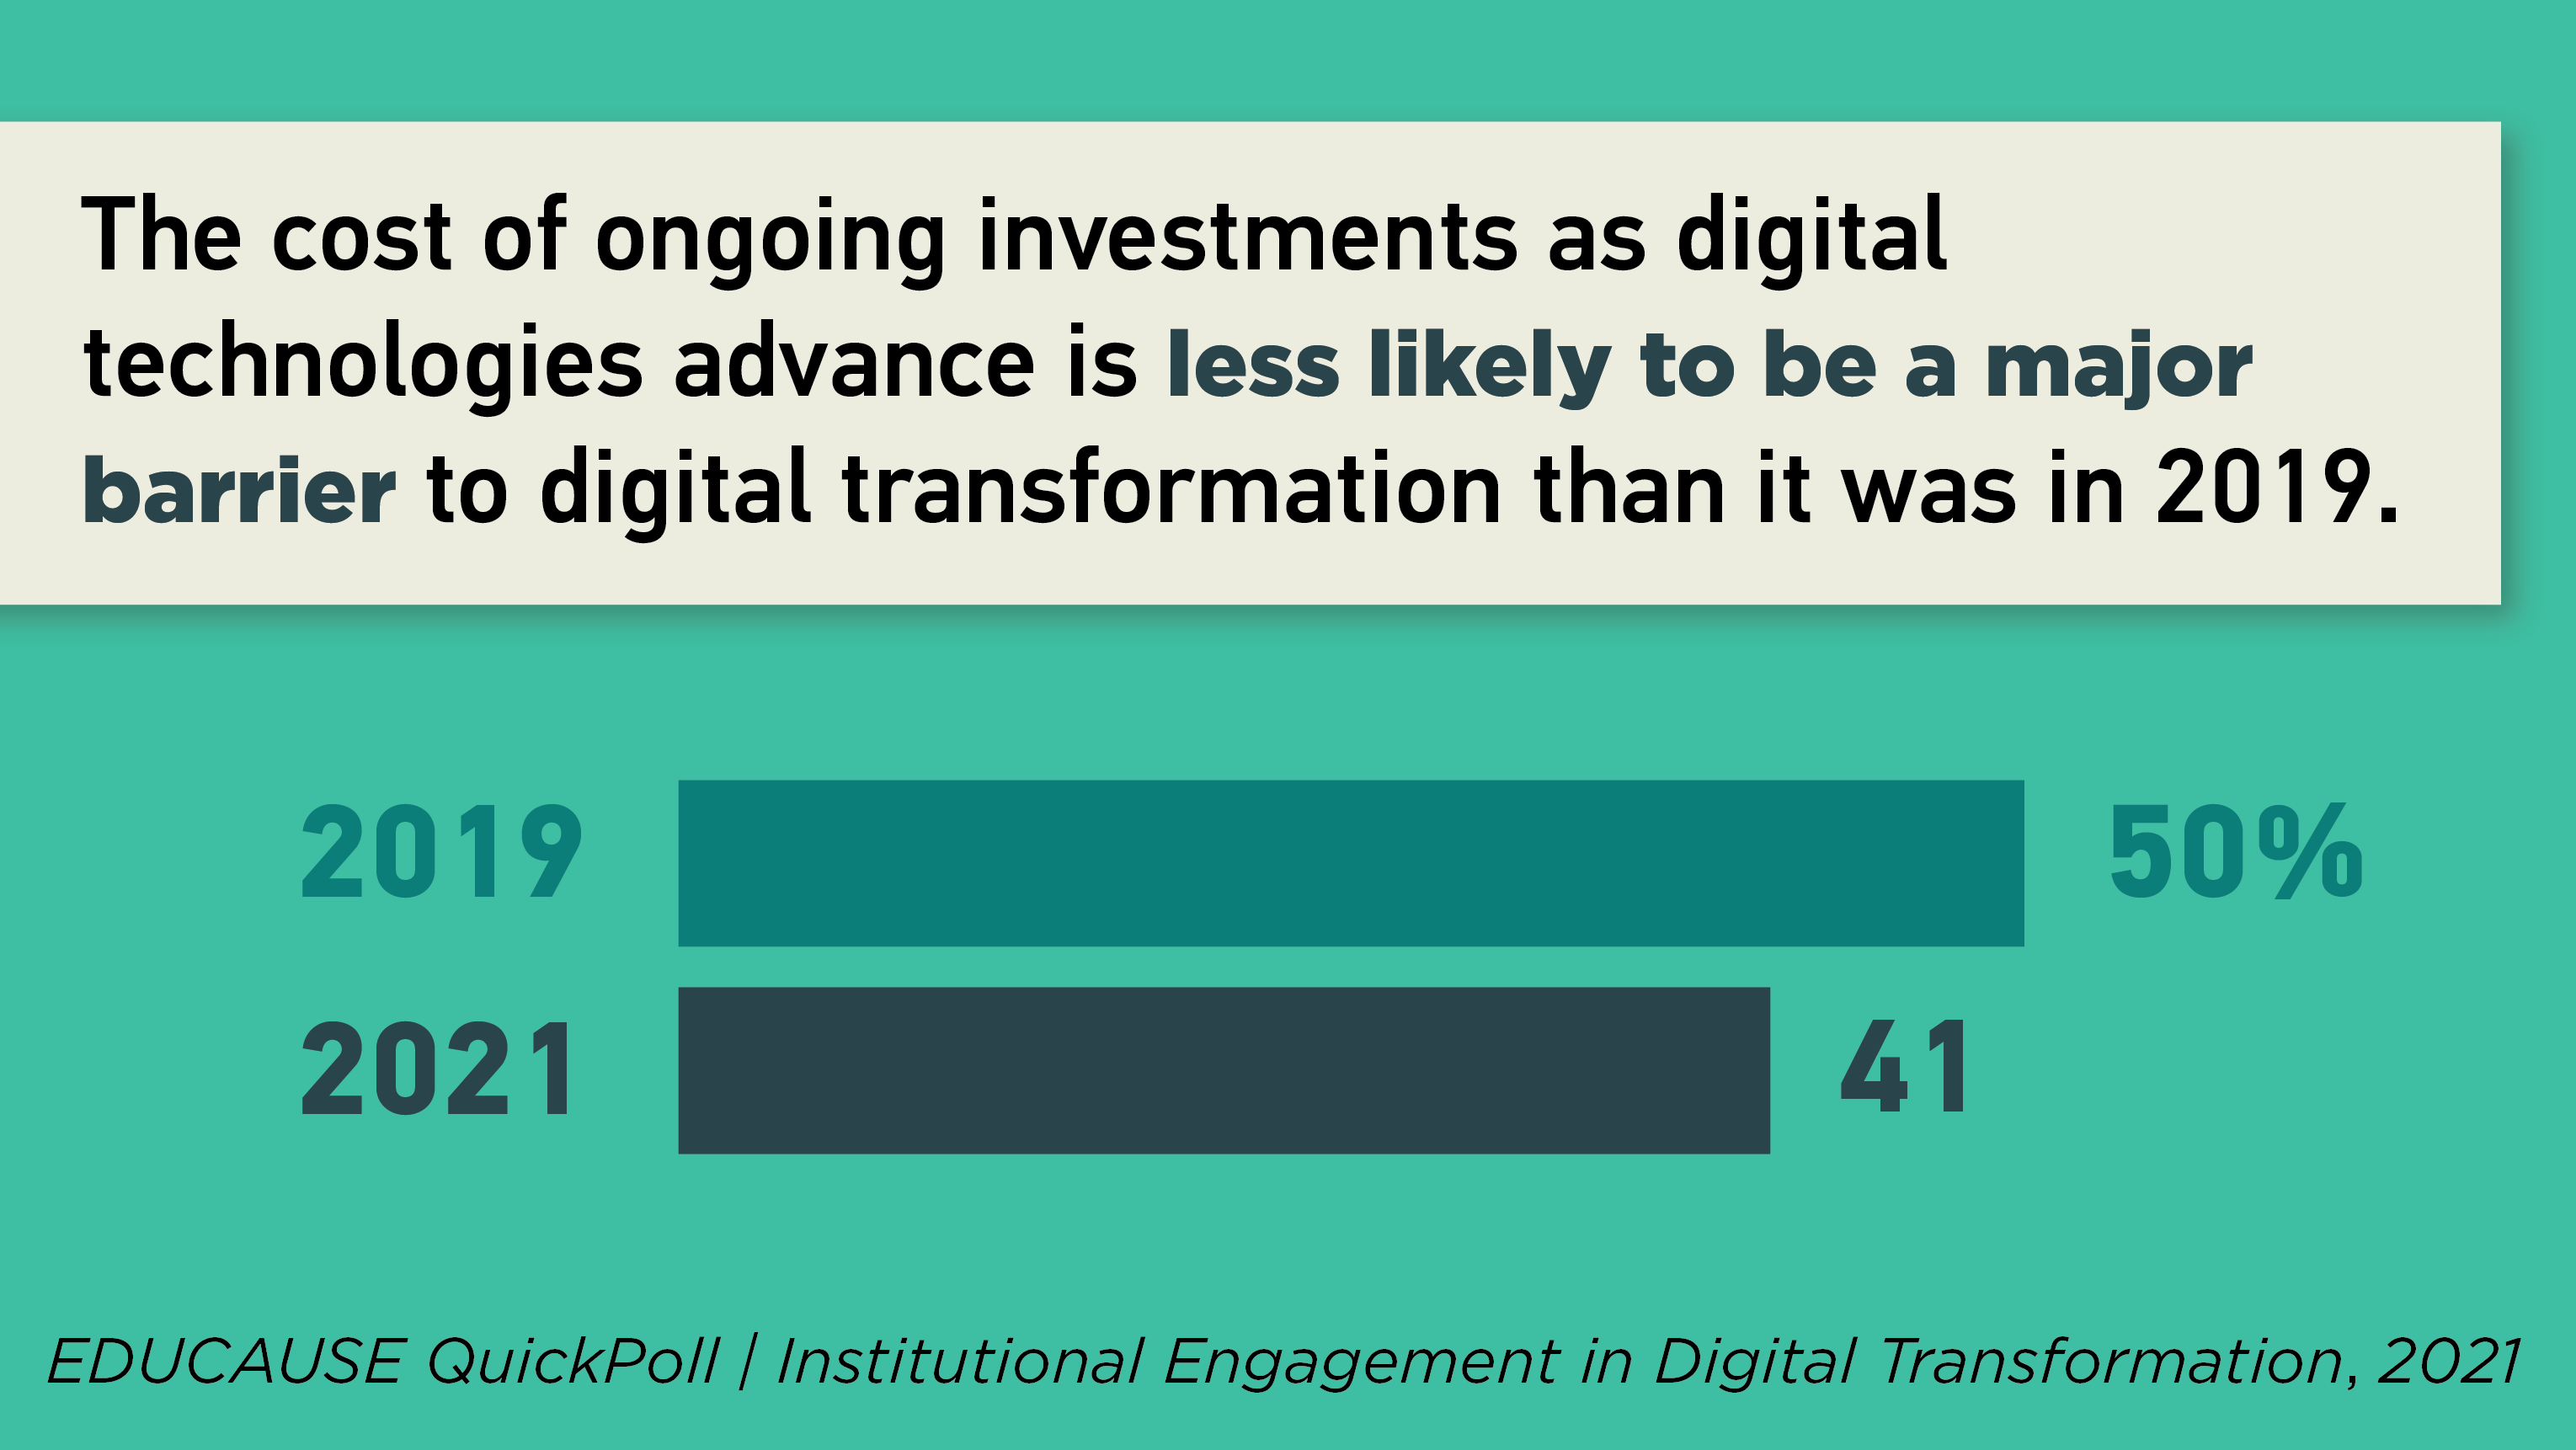 The cost of ongoing investments as digital technologies advance is less likely to be a major barrier to digital transformation than it was in 2019. 2019 50%, 2021 41%. EDUCAUSE QuickPoll/Institutional Engagement in Digital Transformation, 2021.